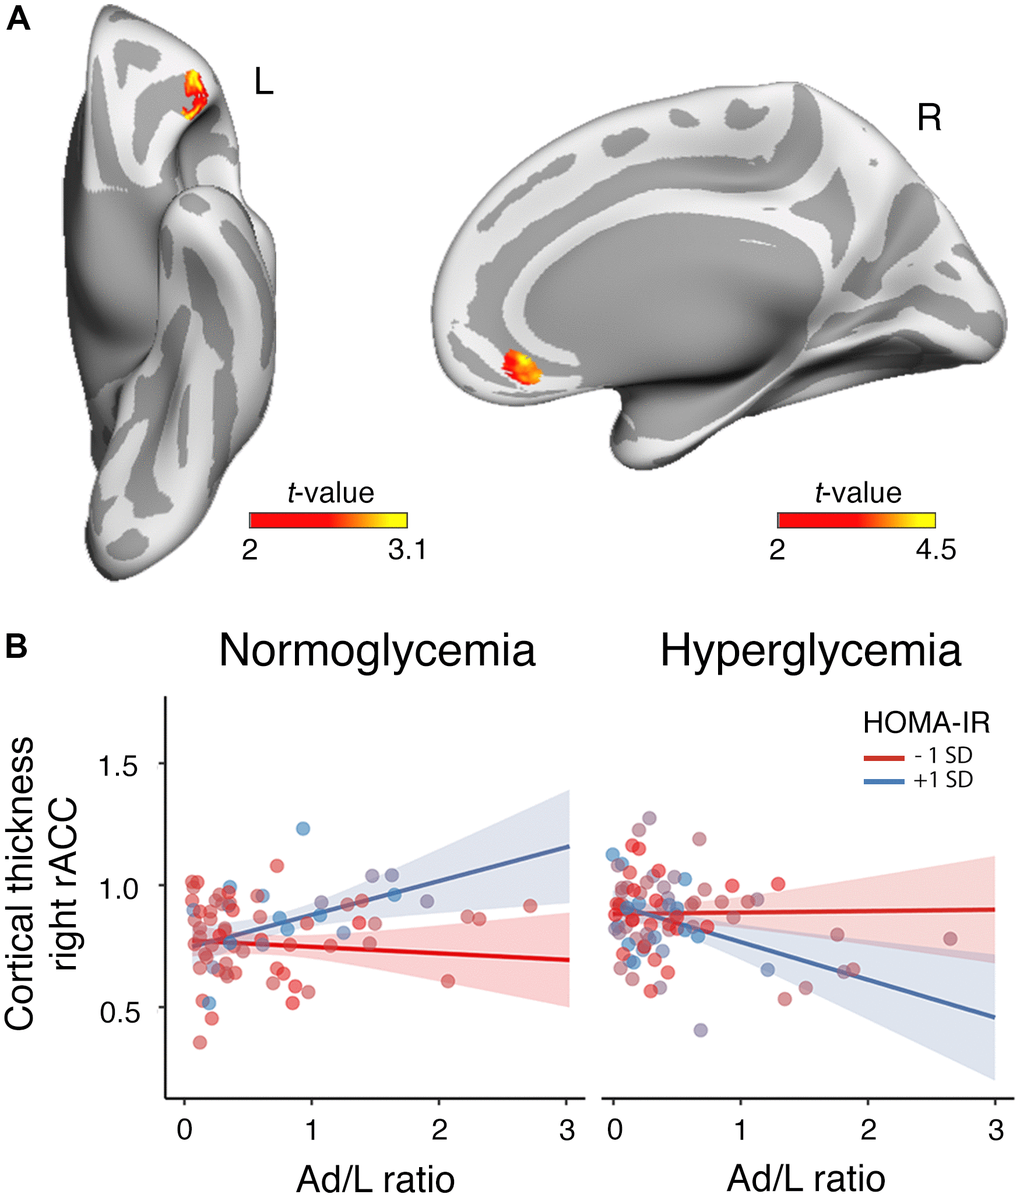 Moderating role of HOMA-IR and glycemia in the association between the Ad/L ratio and cortical thickness. (A) Results of the three-way interaction (Ad/L ratio × HOMA-IR × glycemia) after adjustment for the remaining MtbS components, CRF, BMI, age, sex and years of education. Significant t statistic values were projected into the inflated cortical surfaces (L: left; R: right). (B) Scatterplot to represent the post-hoc of the three-way interaction effect shown in panel (A). It shows the association of the Ad/L ratio with cortical thickness in the rostral anterior cingulate (rACC) of the right hemisphere at 1 SD below and above the mean of HOMA-IR for participants showing normal blood glucose levels (left panel) and hyperglycemia (right panel). The shaded areas reflect the confidence intervals (95%) for the fitted values.